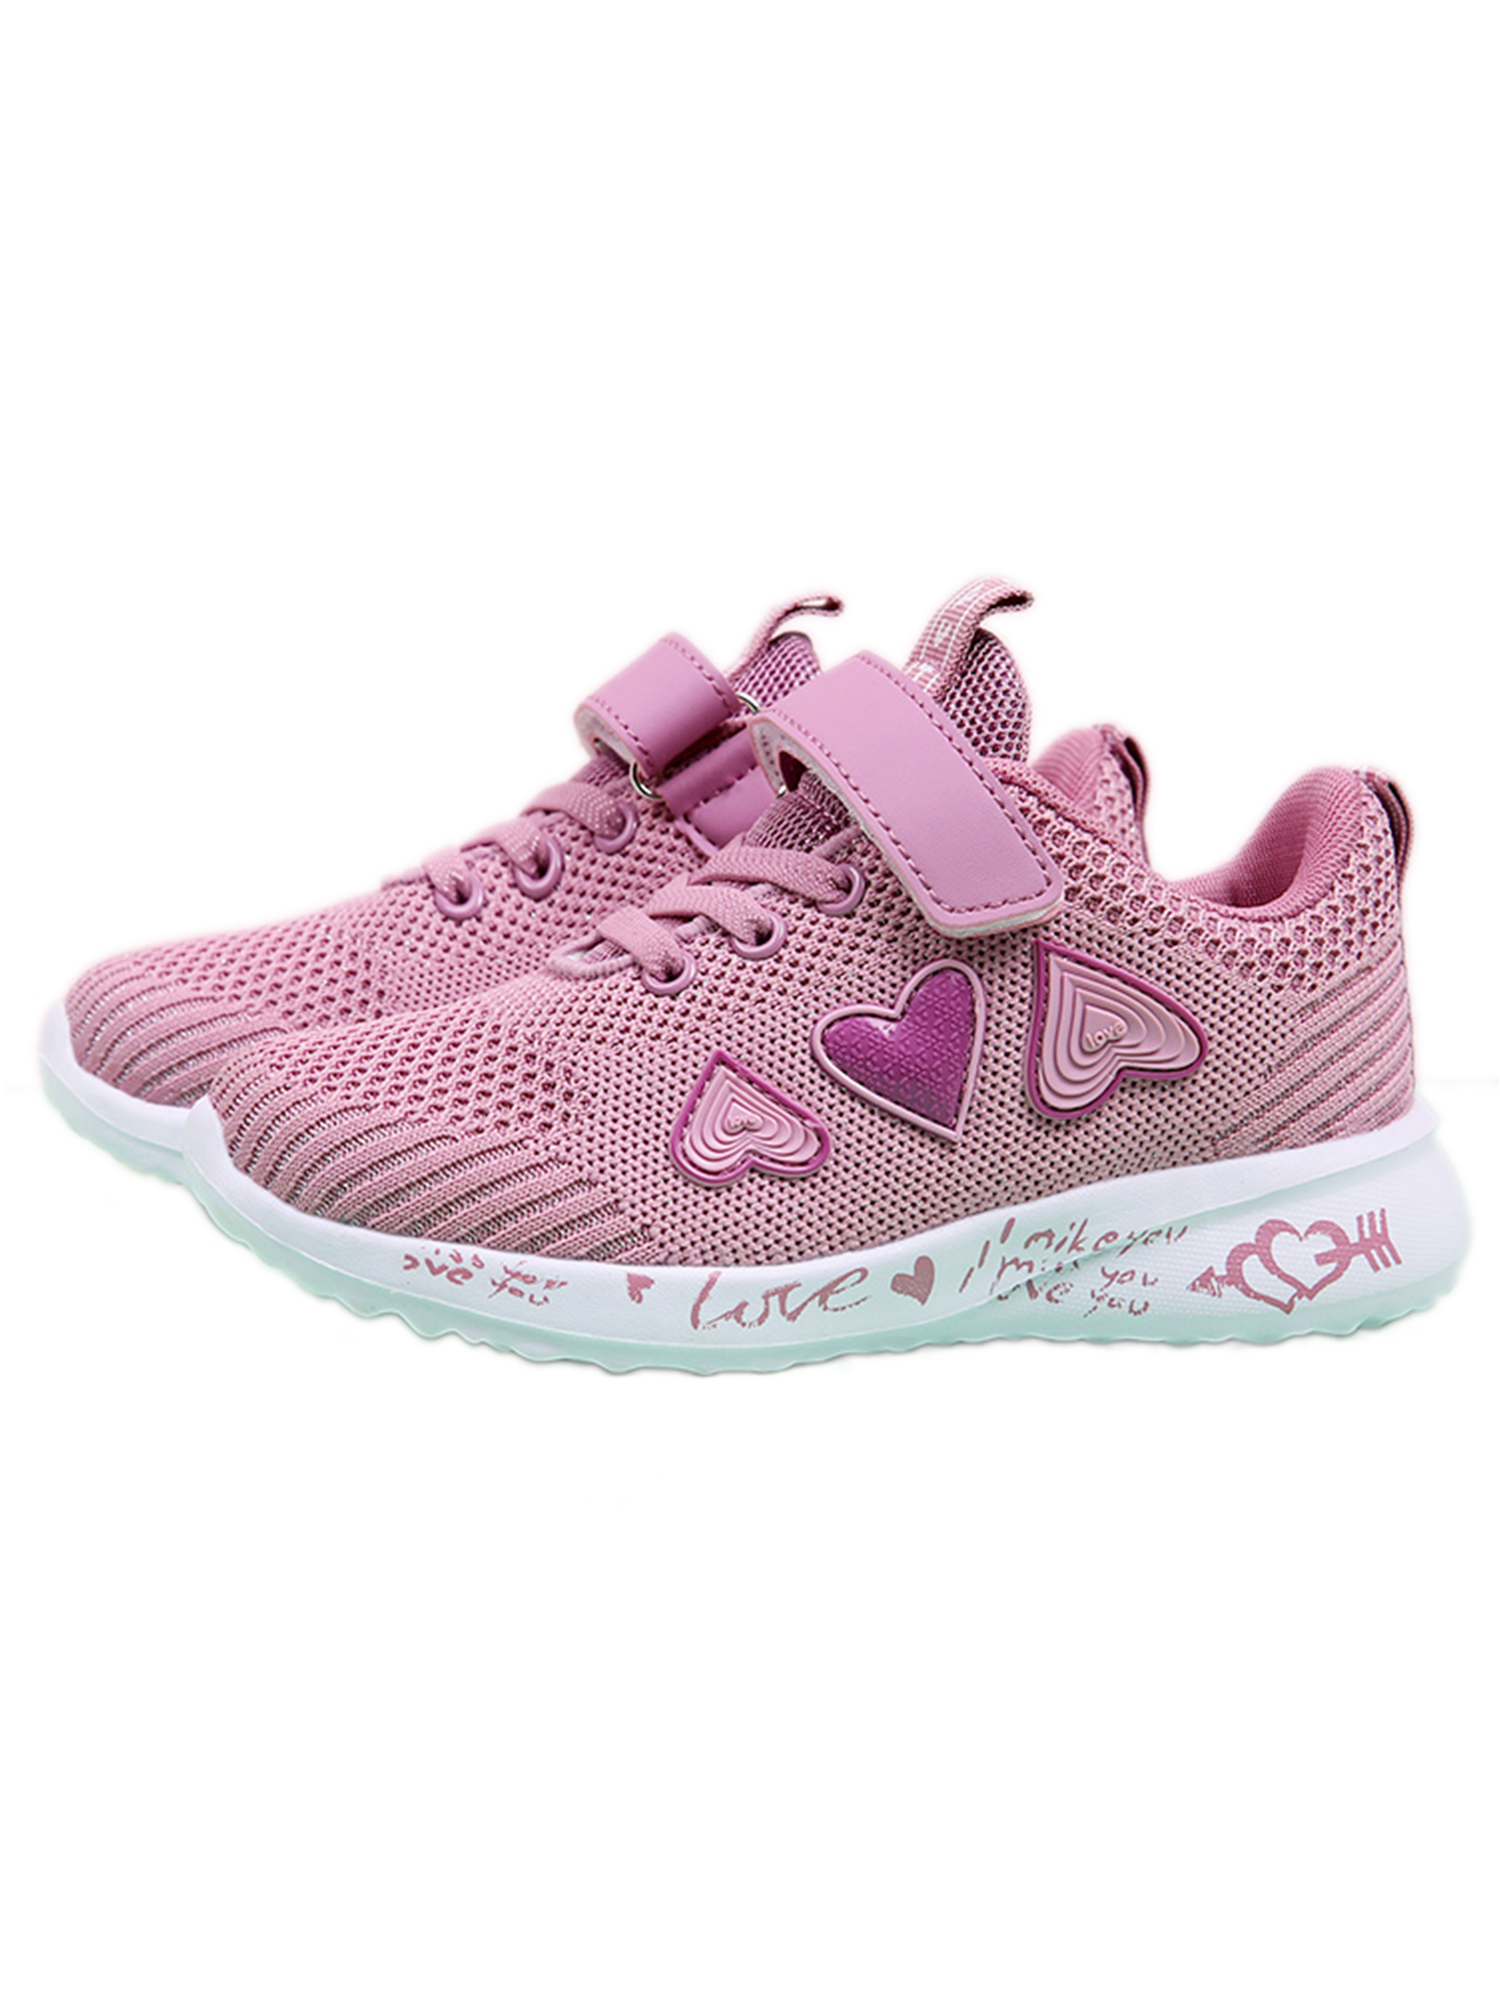 Tanleewa Lovely Girls Sports Shoes Kids Breathable Sneakers Lightweight Casual Shoe Size 9 - image 5 of 7